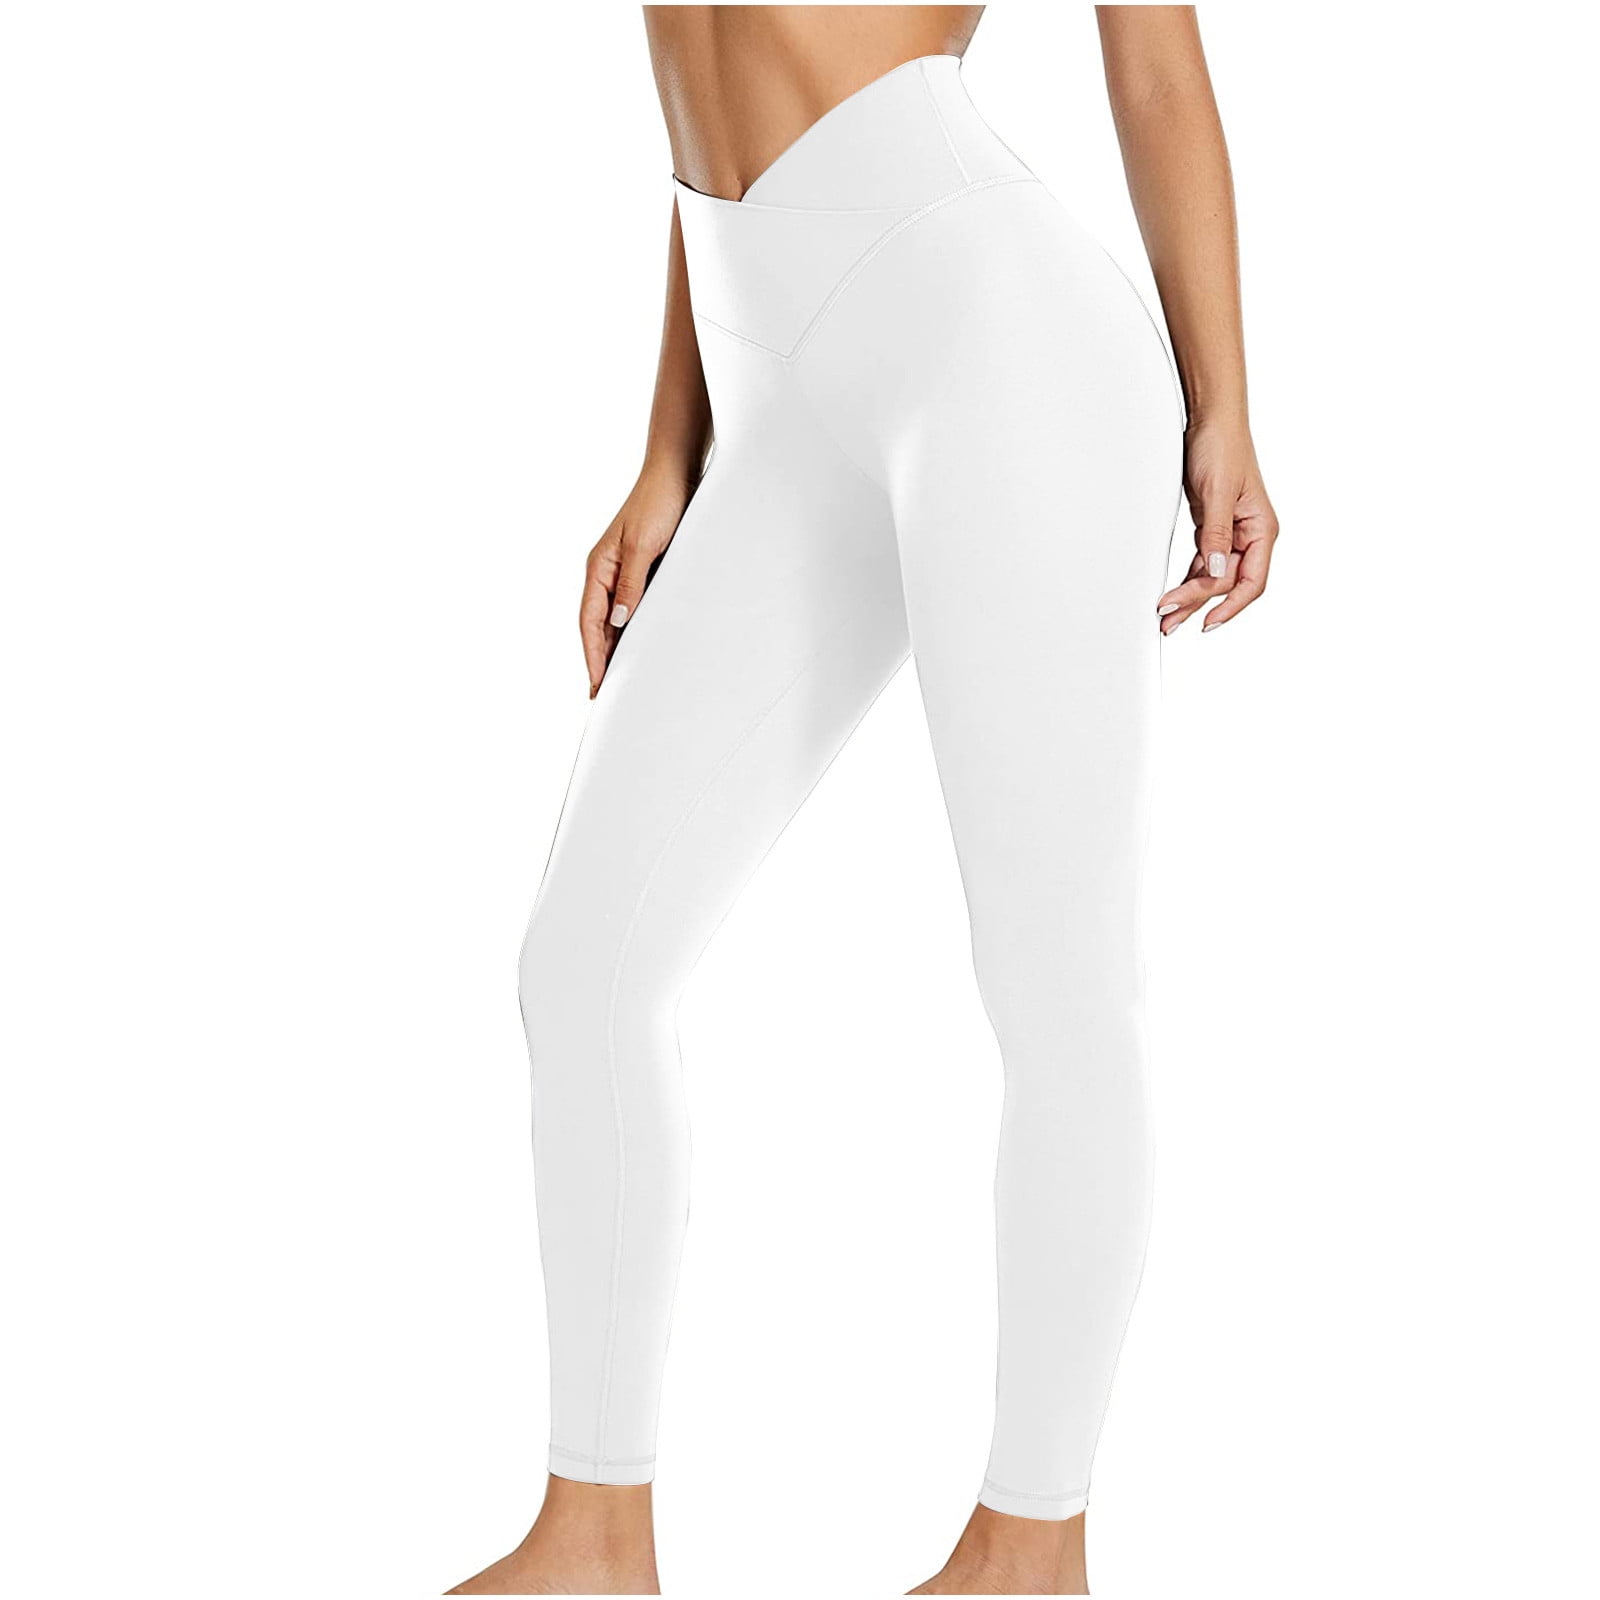 V Crossover Leggings for Women Solid Butt Lifting High Waist Seamless  Workout Yoga Pants Buttery Soft Athletic Pants(L，White）